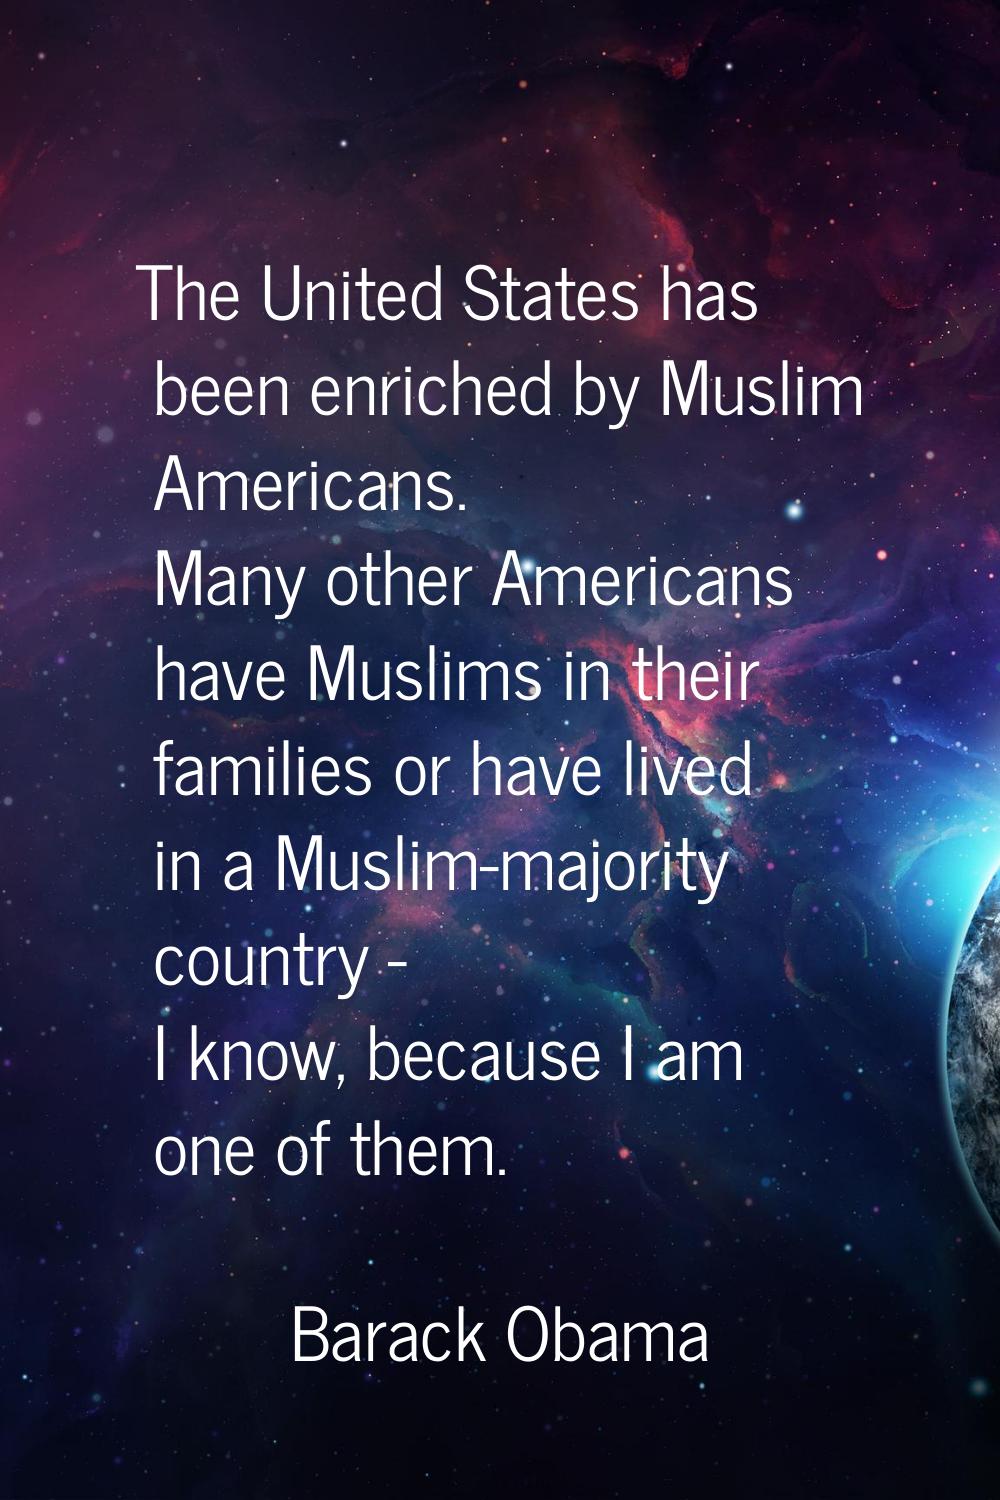 The United States has been enriched by Muslim Americans. Many other Americans have Muslims in their